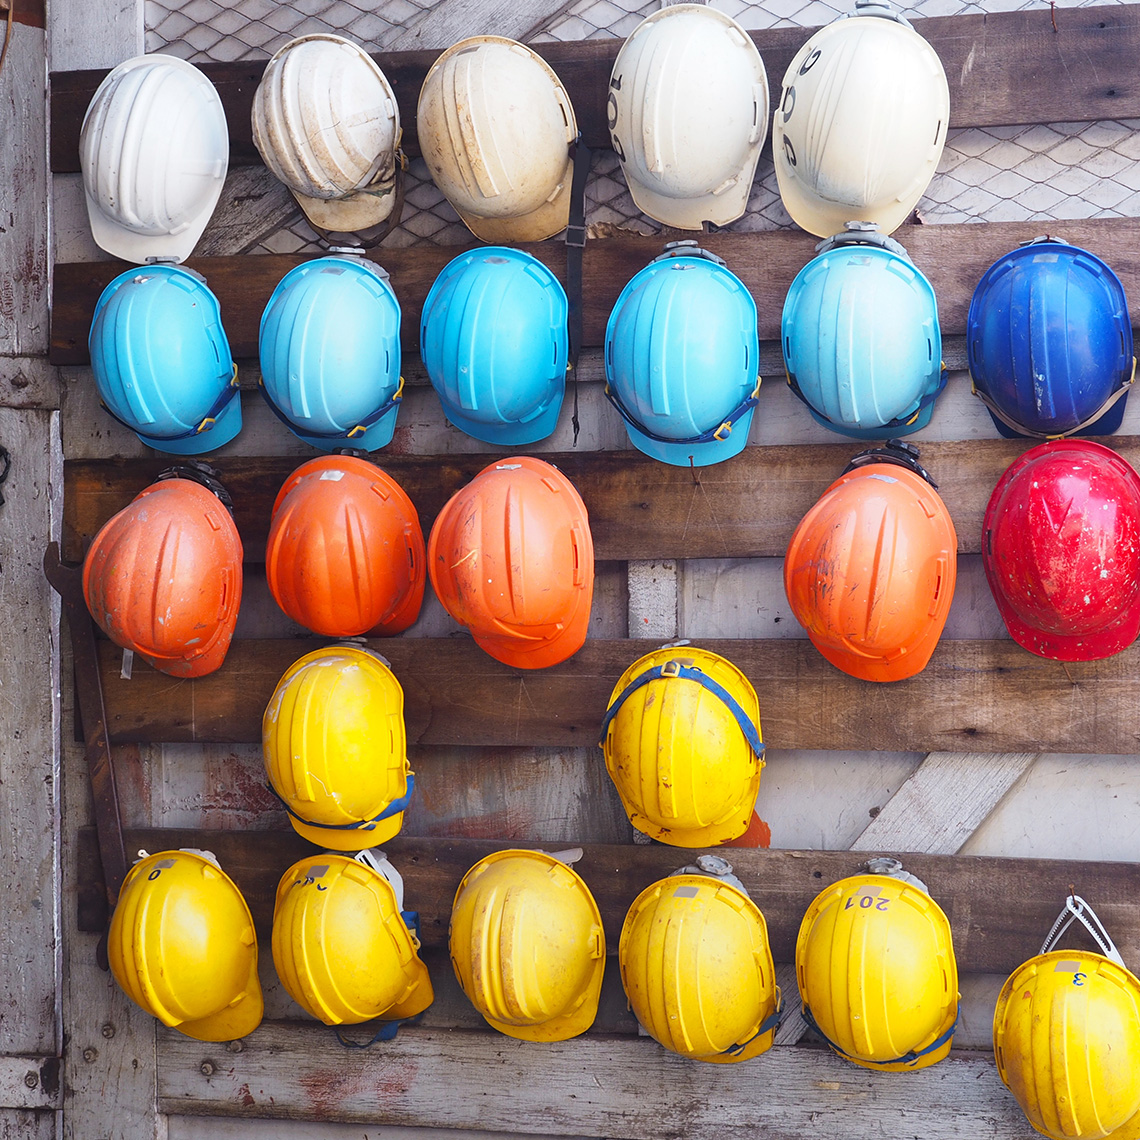 a collection of hard hats ready for use